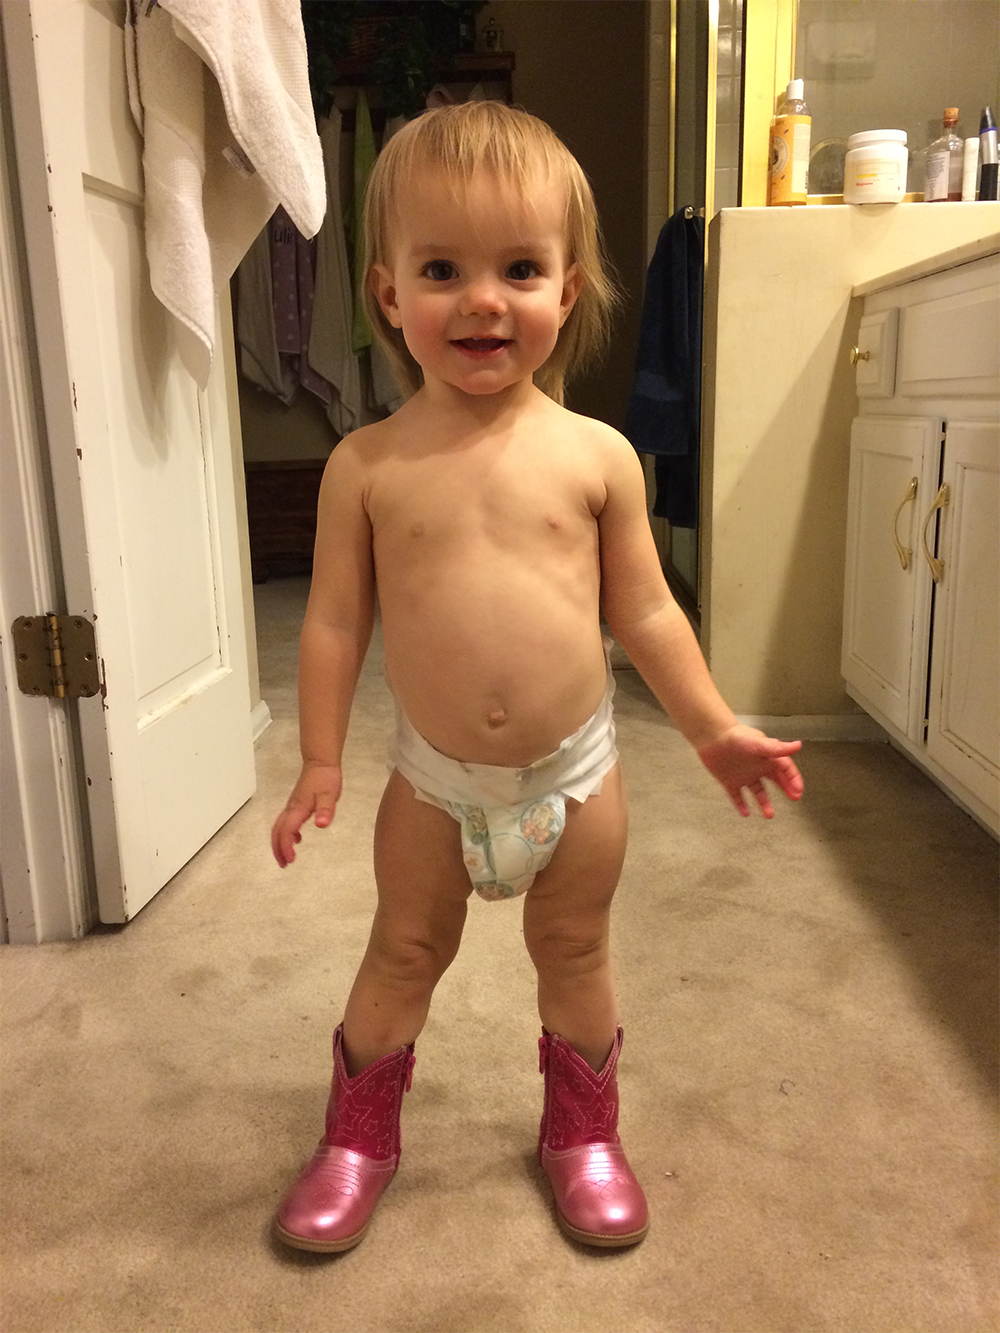 baby with full diaper